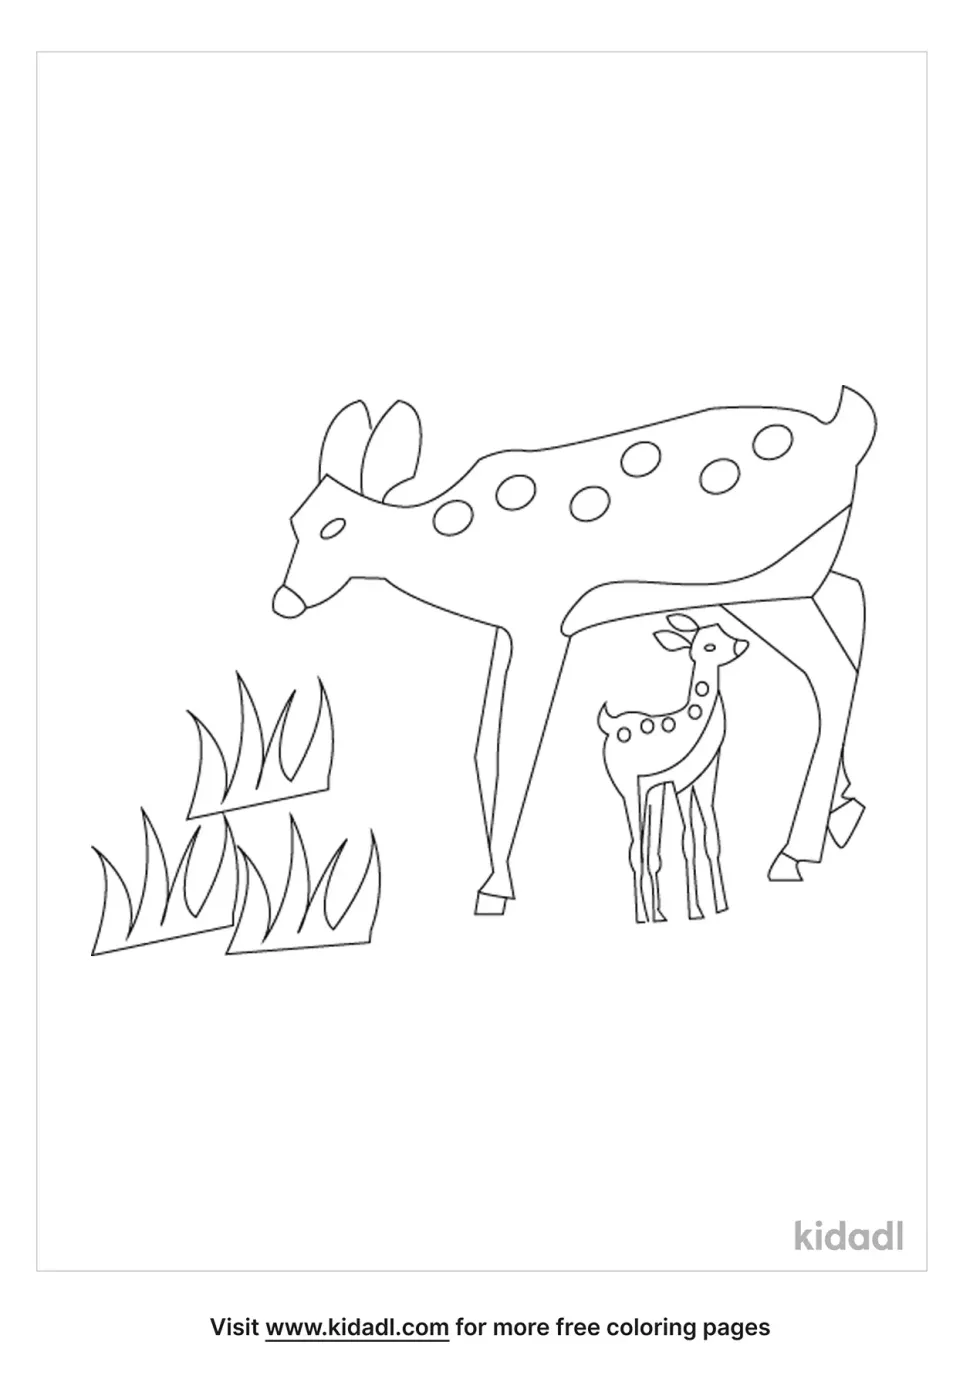 Nursing Fawn Coloring Page